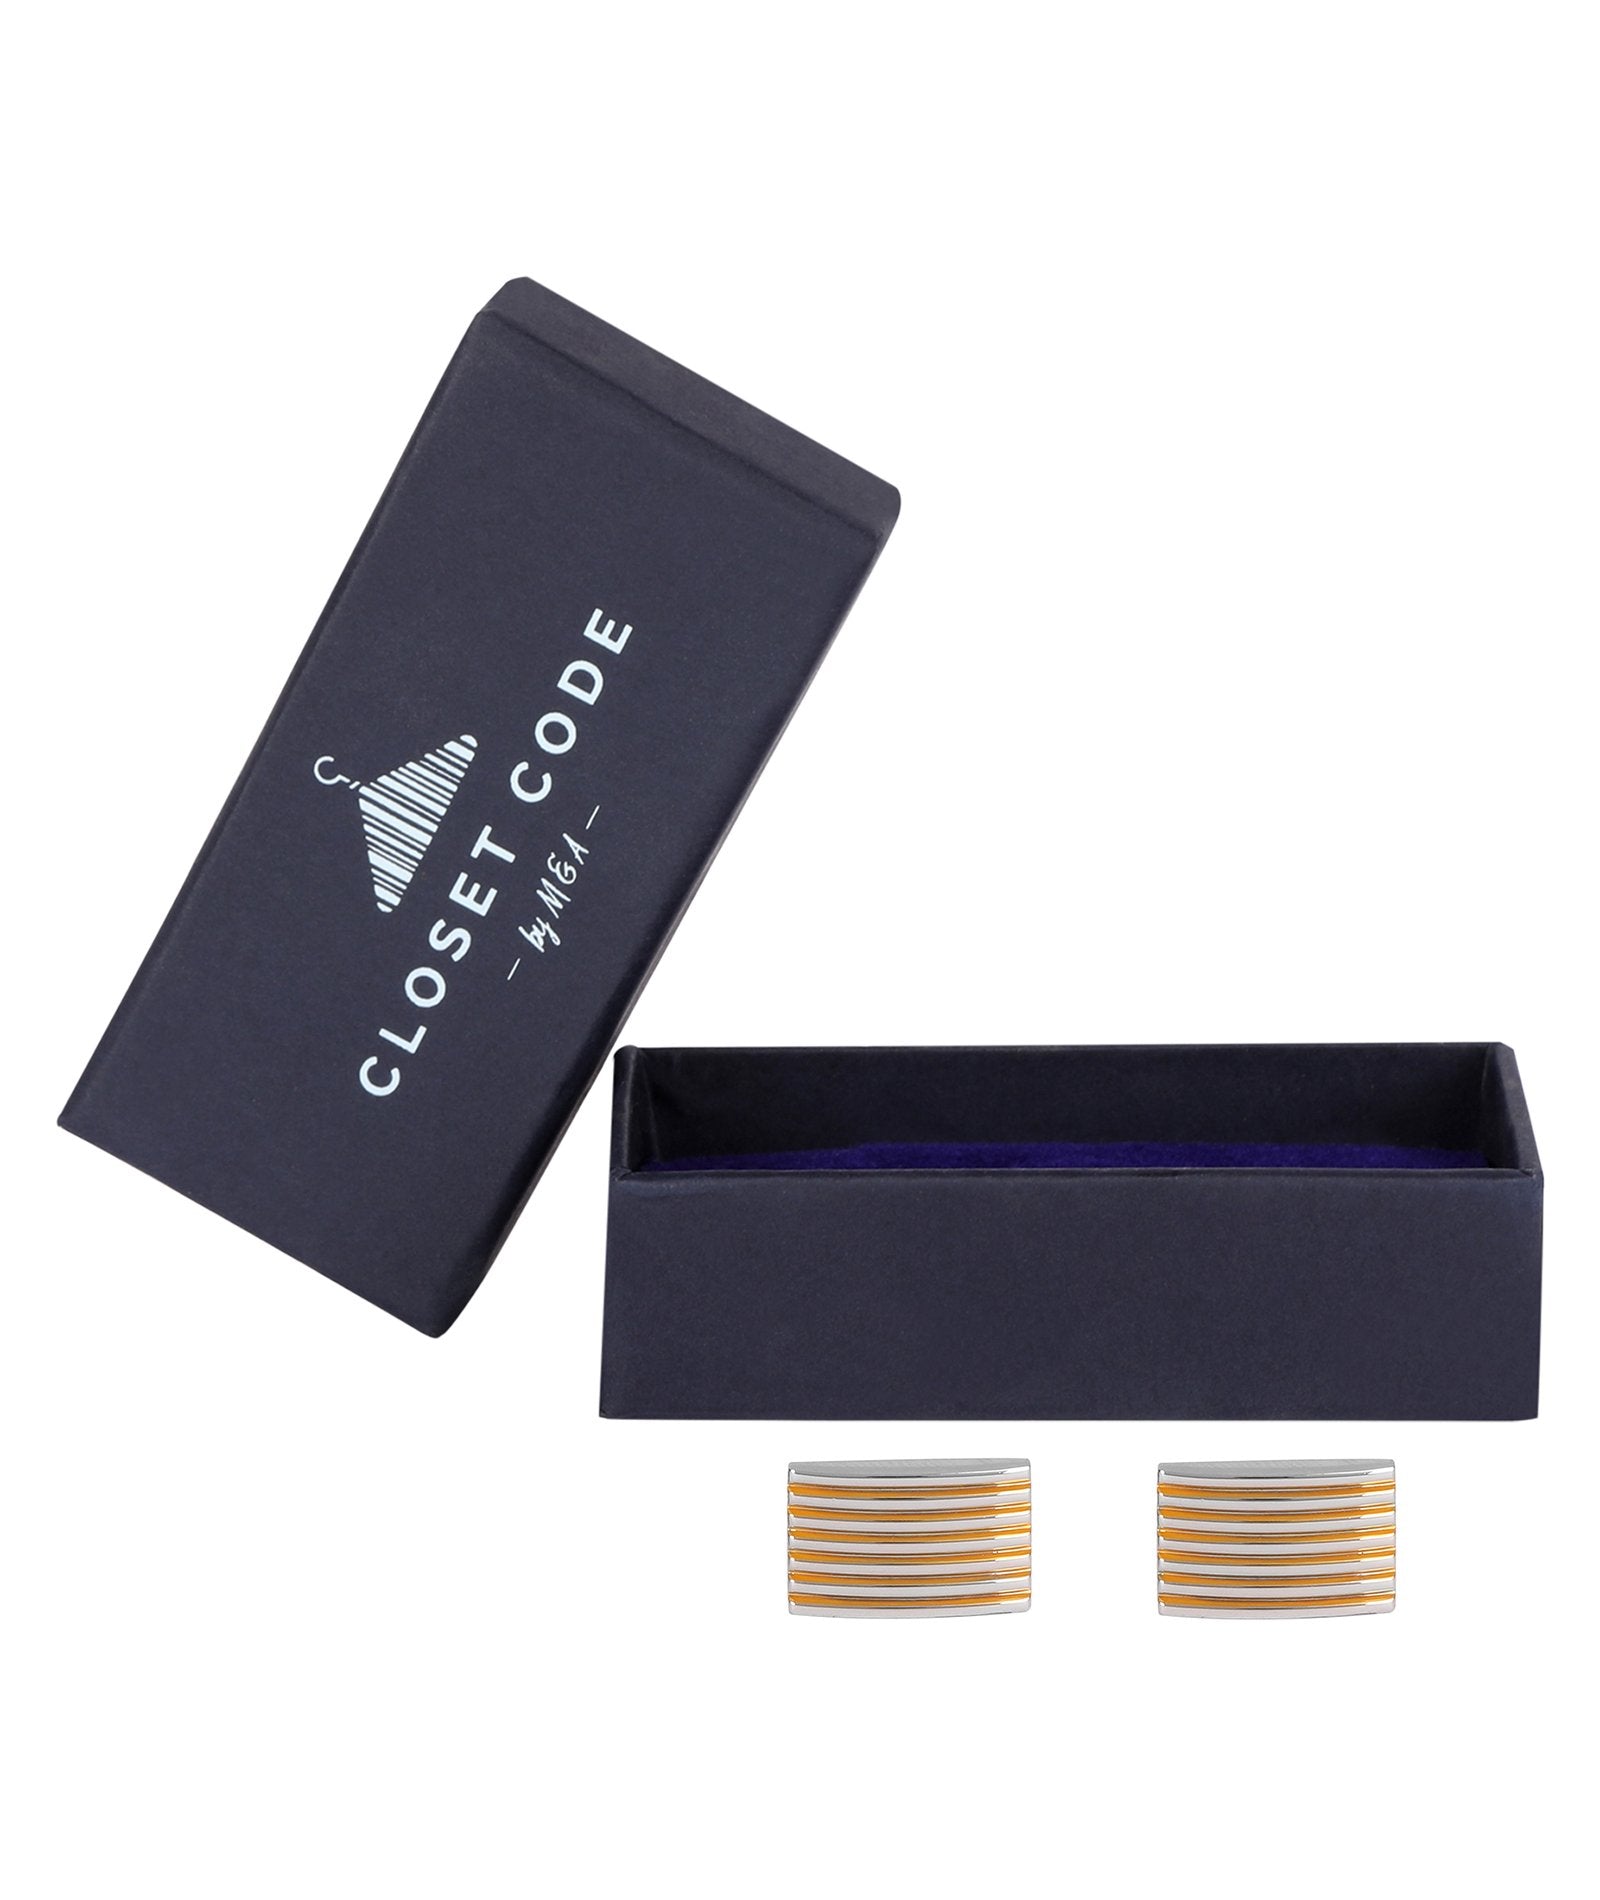 Gold and Silver Pinstripes Cufflink